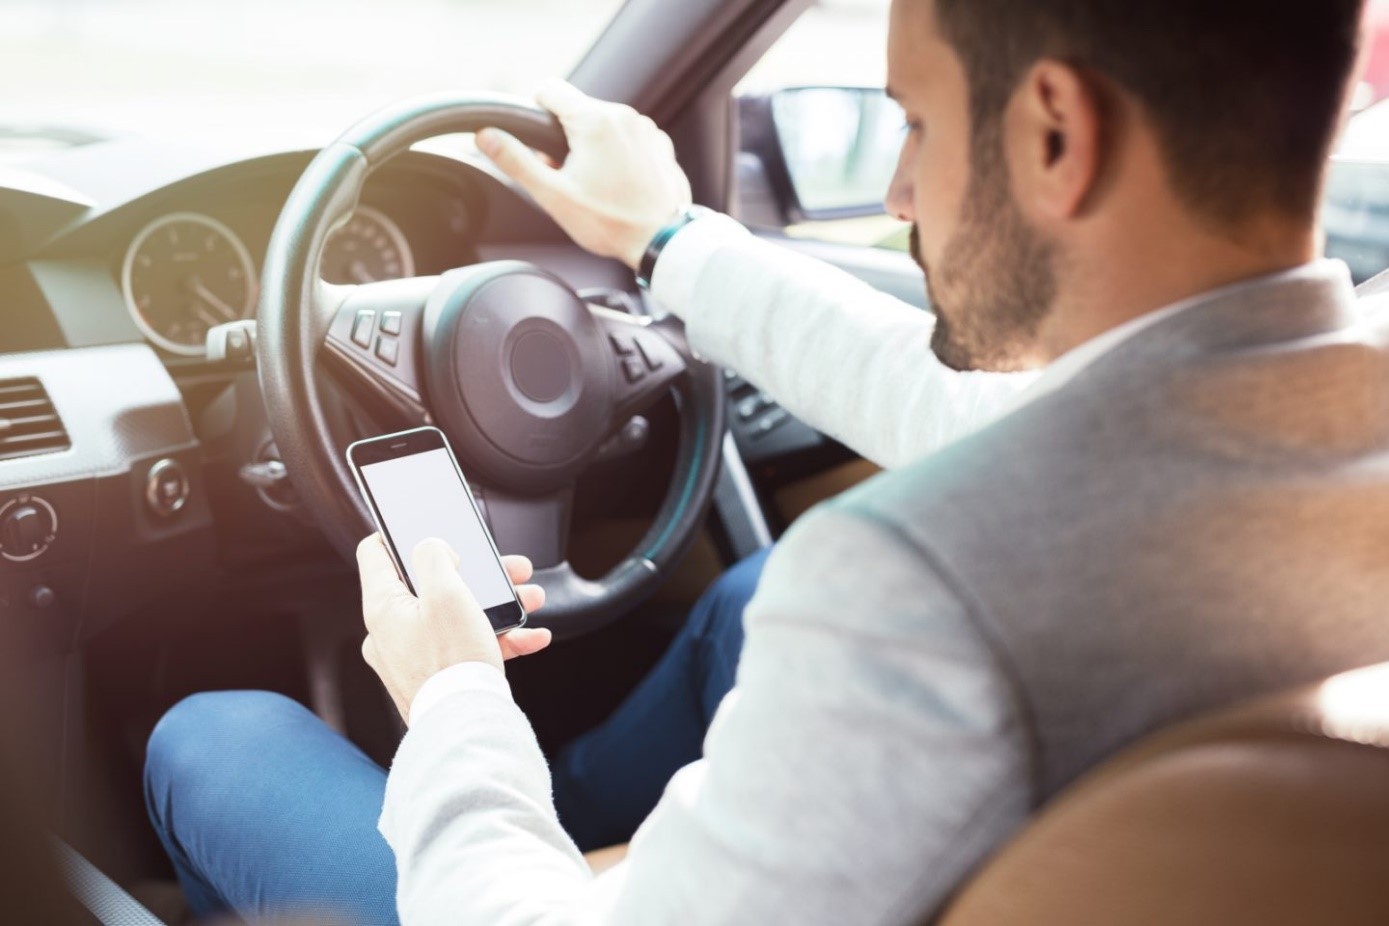 The Use of Mobile Devices Whilst Driving